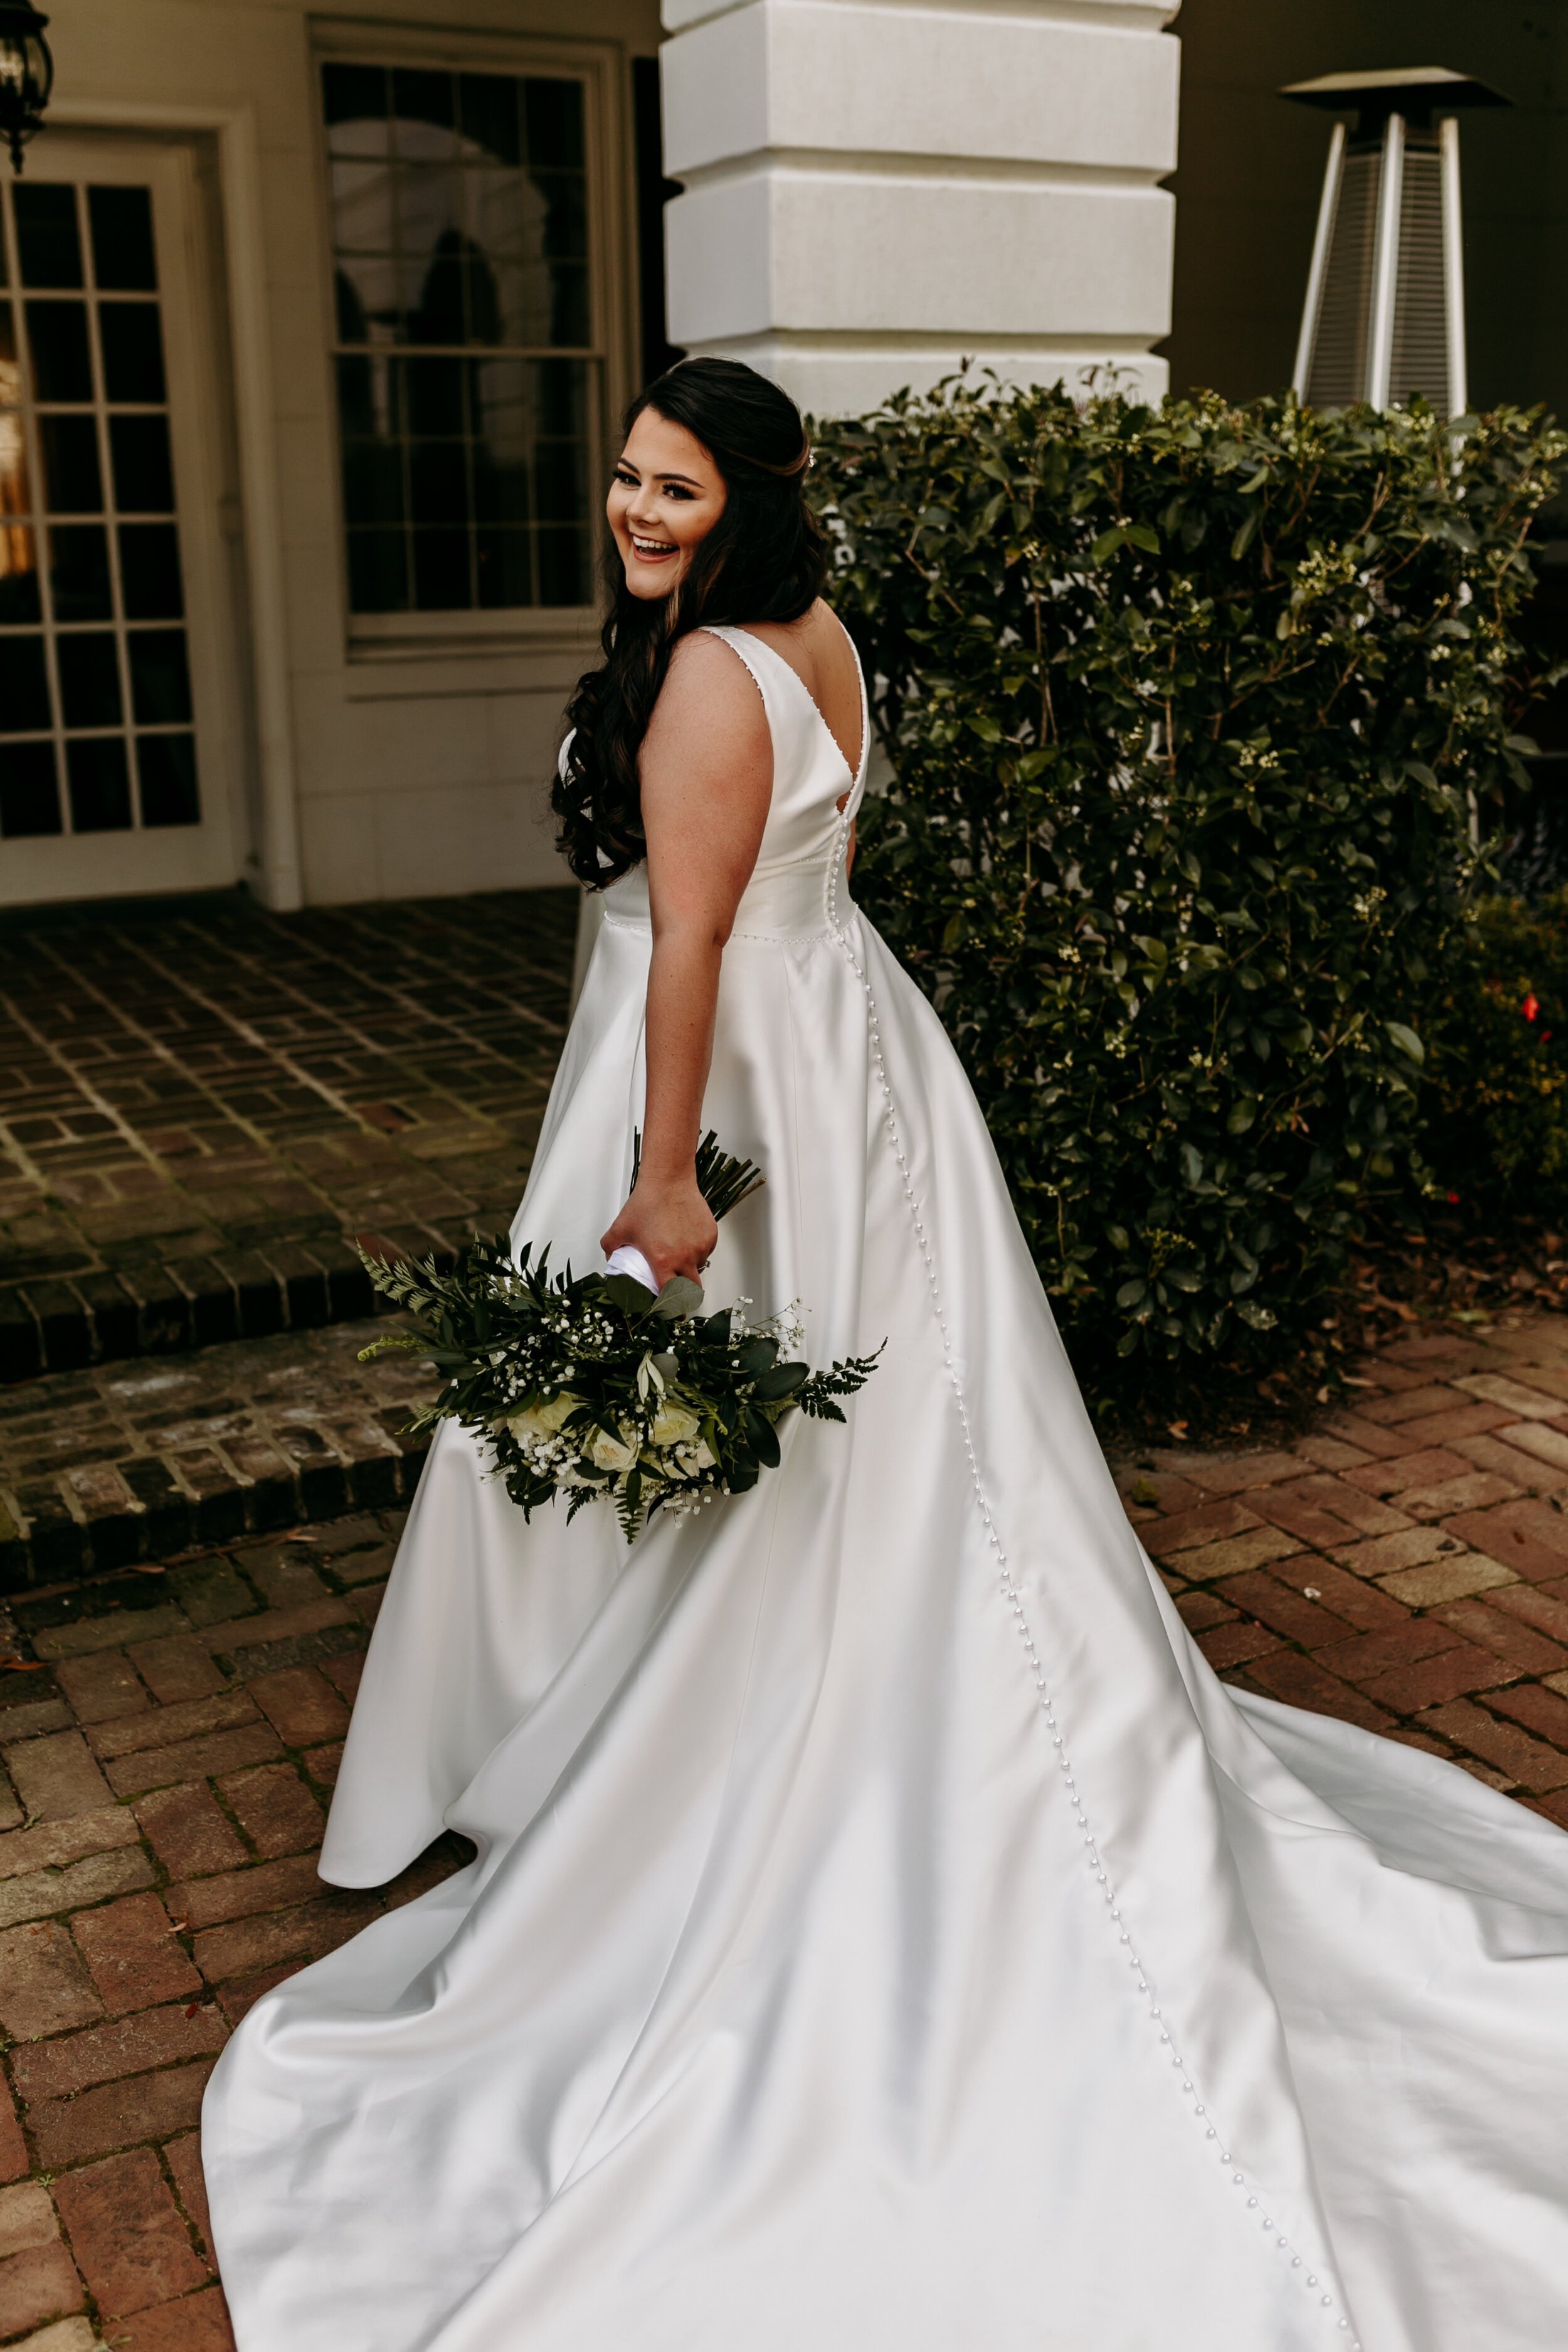 ivory-and-beau-bride-taylor-down-for-the-gown-blog-bridal-blog-wedding-blog-real-bride-maggie-sottero-wedding-dress-satin-ball-gown-bridal-gown-wedding-gown-beiber + shearouse wedding-0285.jpg